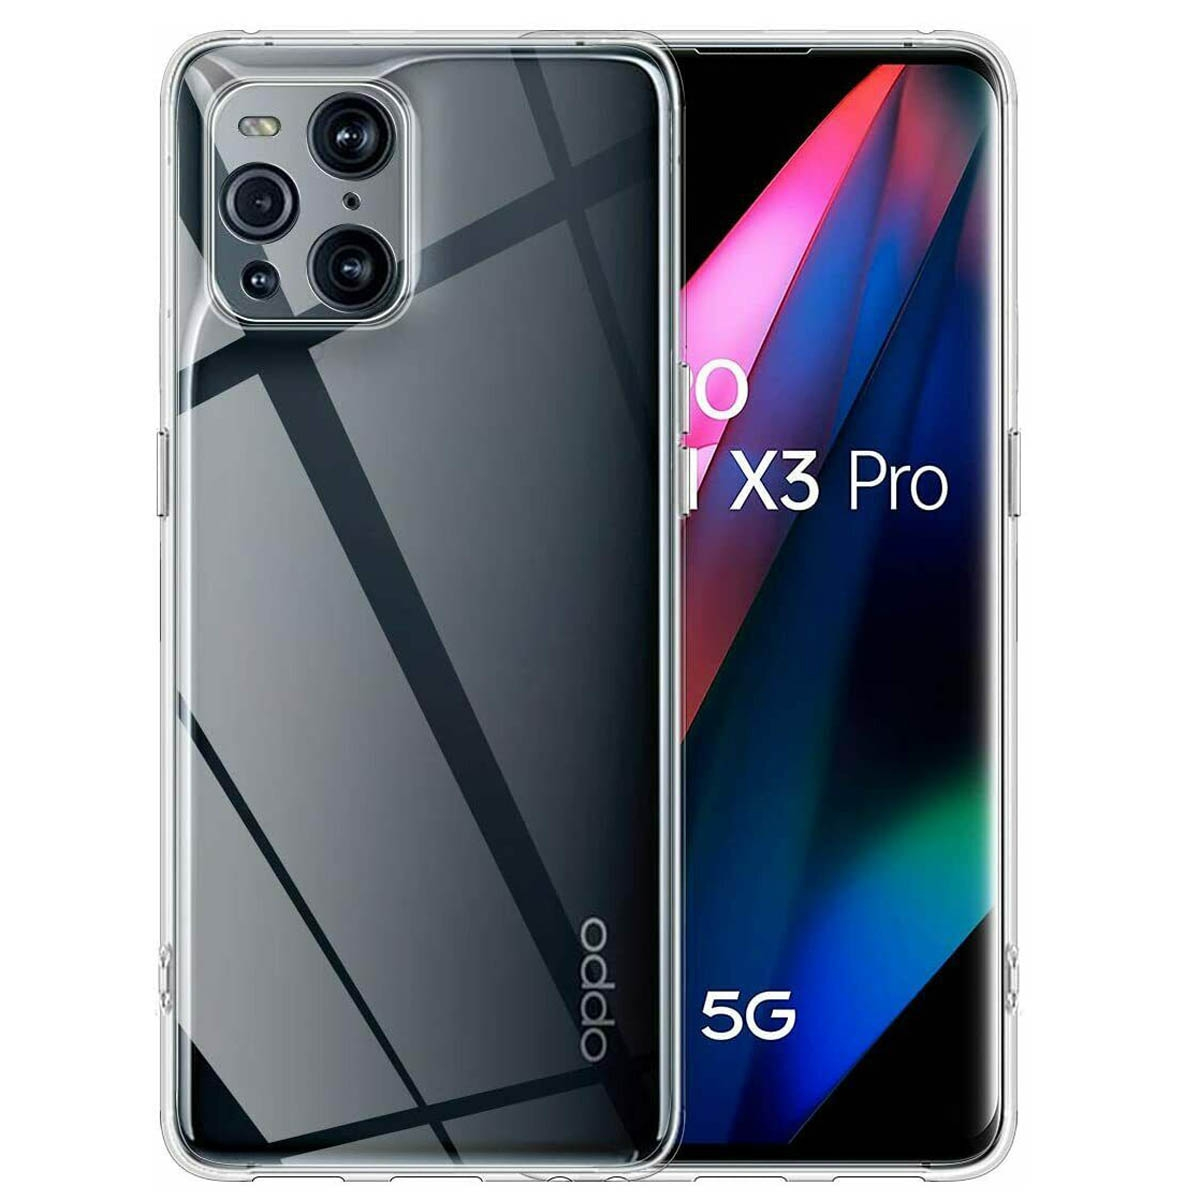 Backcover, CA4, CASEONLINE Oppo, Transparent 5G, Pro X3 Find